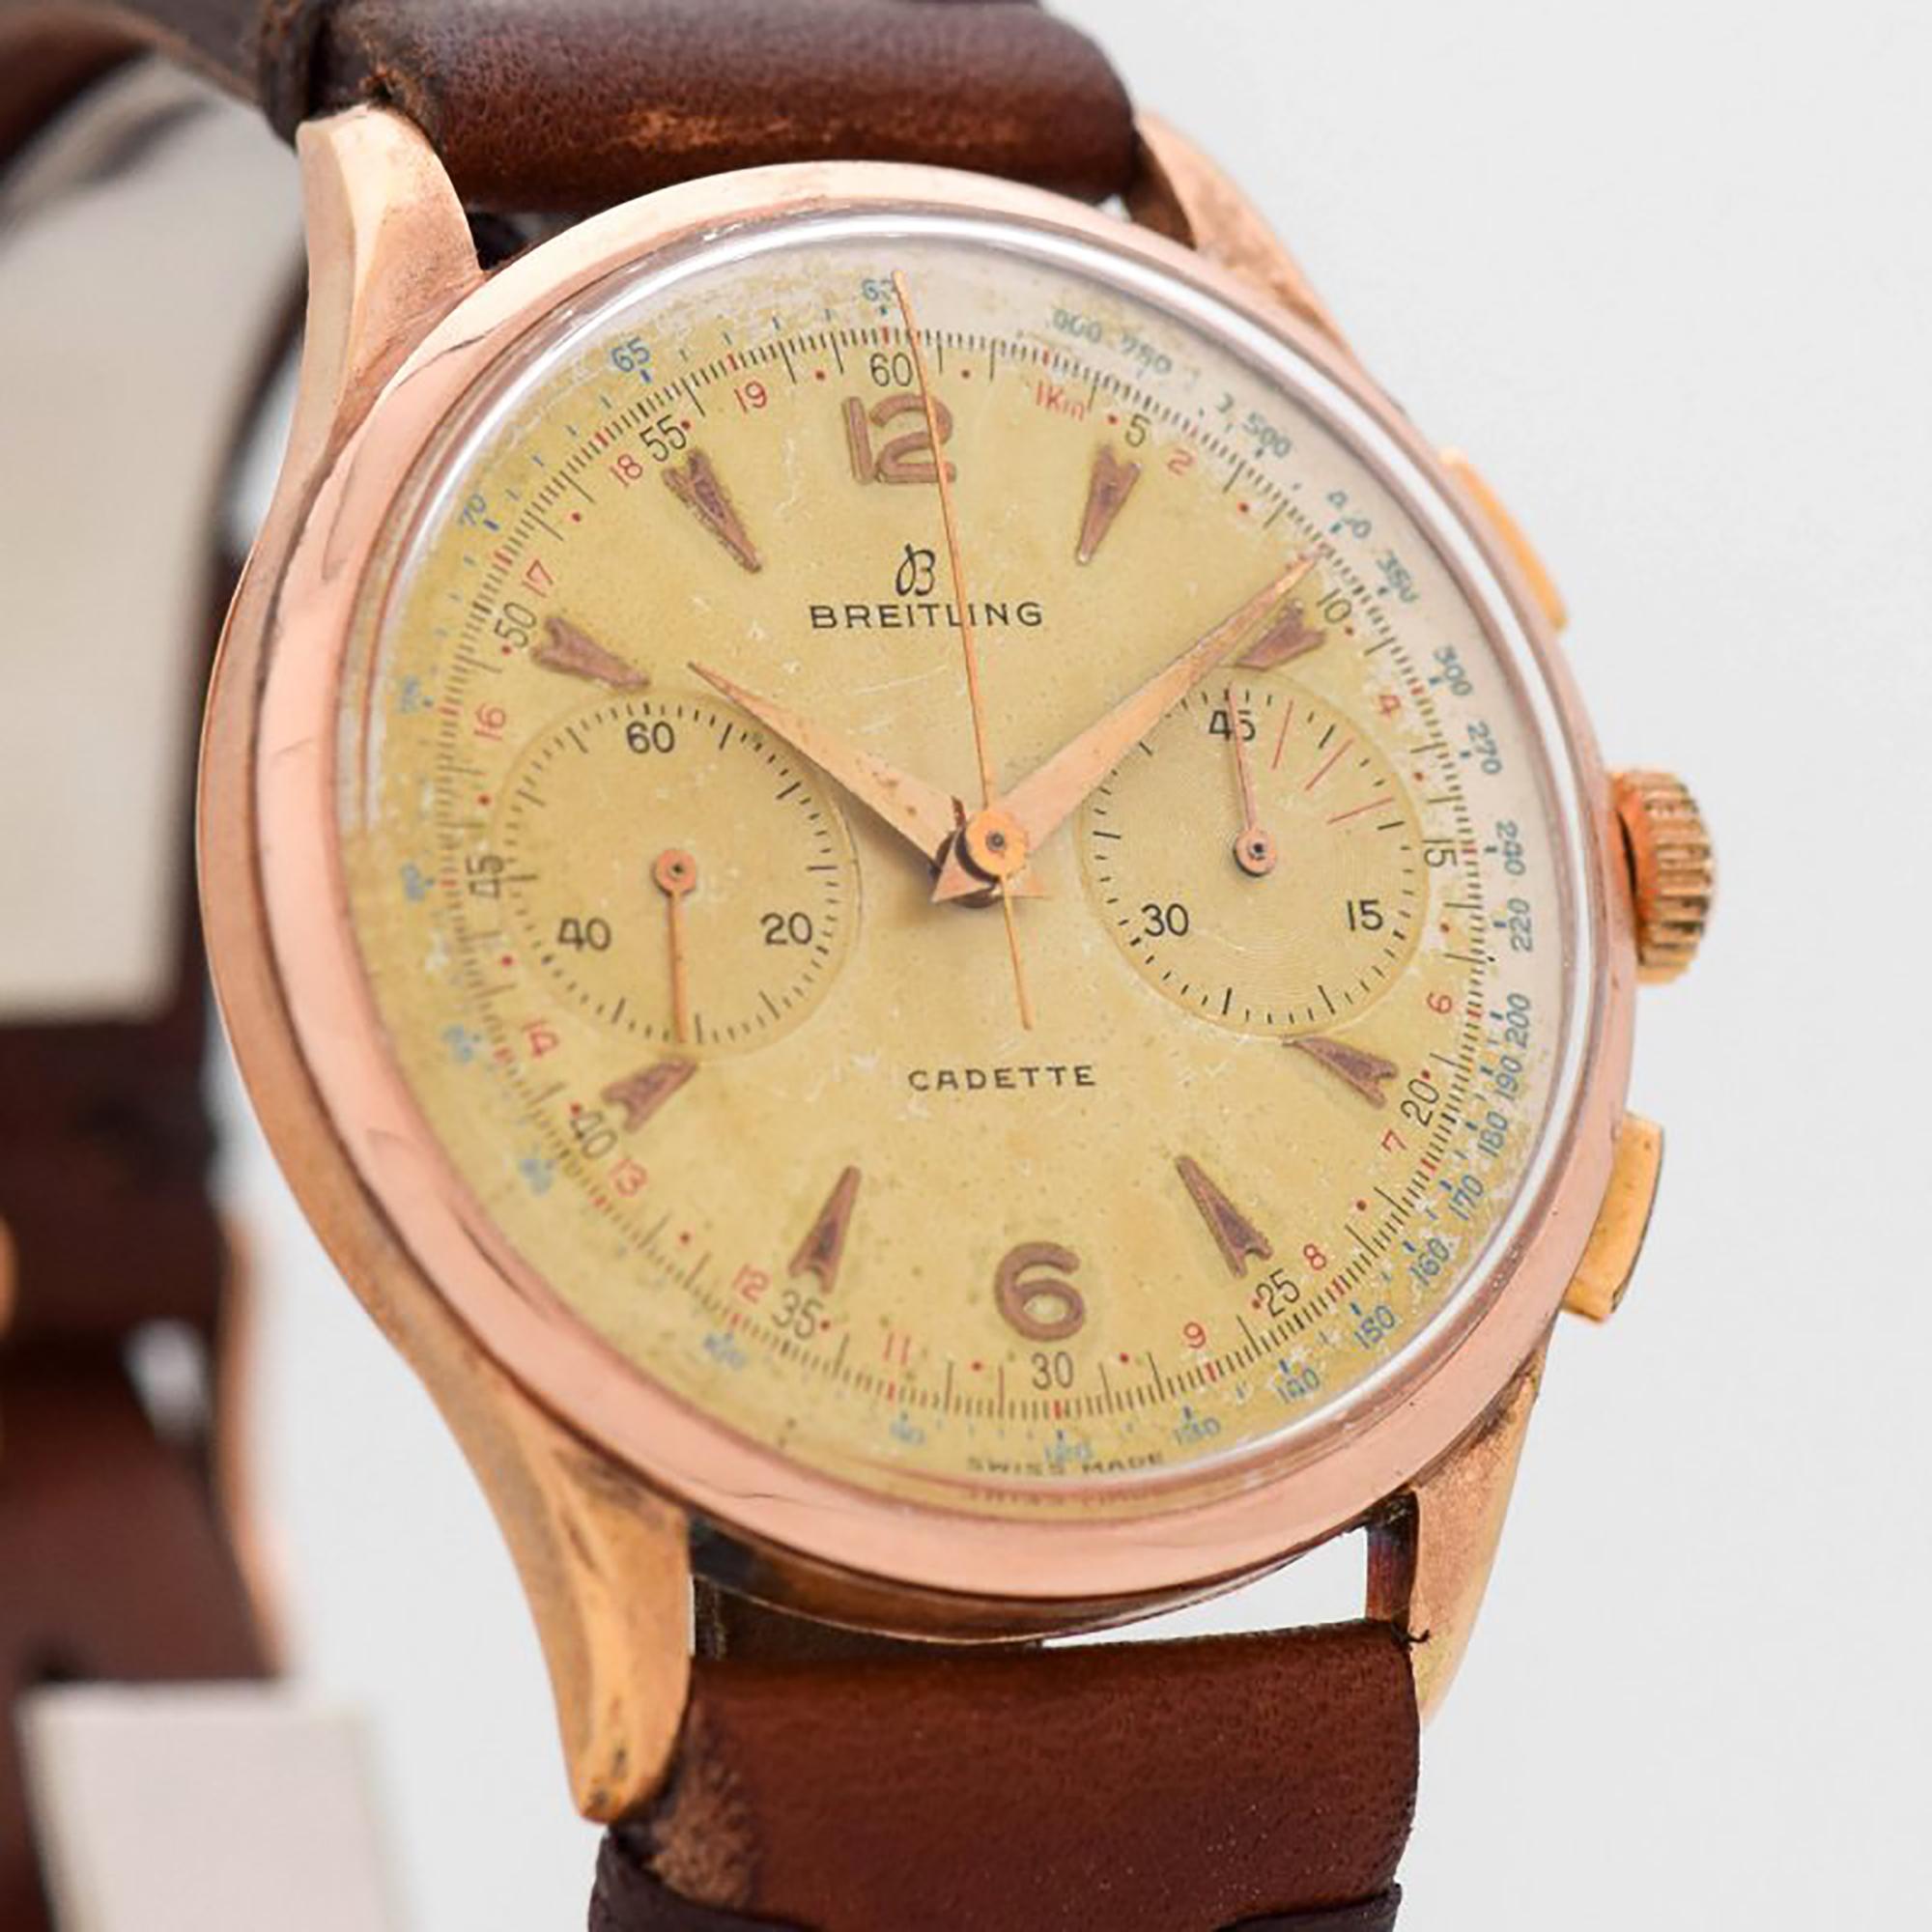 1955 Vintage Breitling Cadette Ref. 1185 Large 2 Register Chronograph 18k Rose Gold watch with Original Gold/Champagne Dial with Applied Rose Gold color Arabic 6 and 12 with Elongated Arrow Markers. 37mm x 42mm lug to lug (1.46 in. x 1.65 in.) -